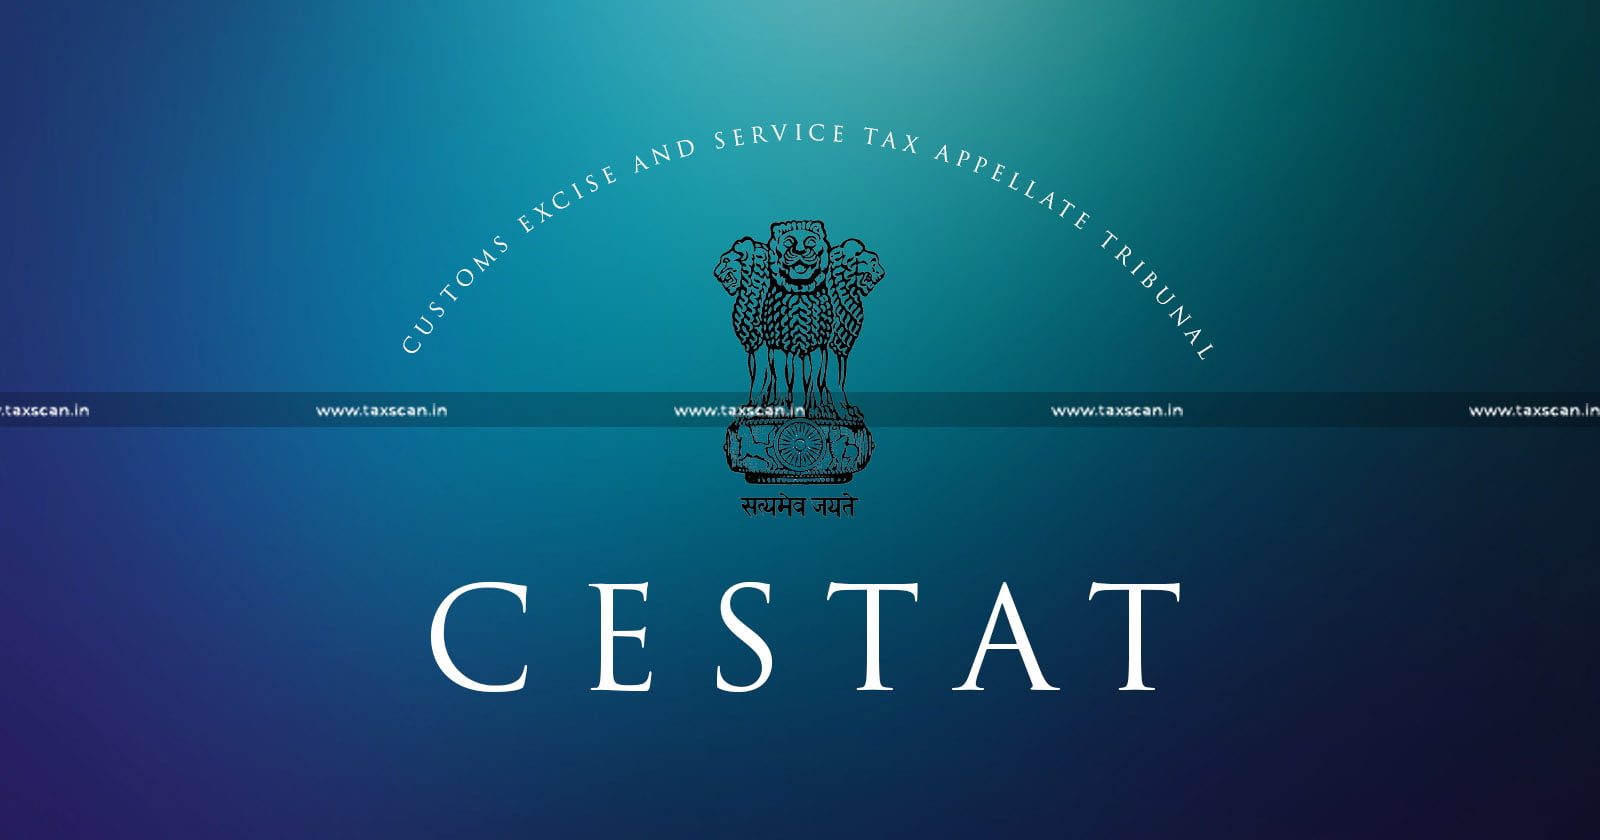 CESTAT - Software - Sale Not Service - Ahmedabad bench - TAXSCAN